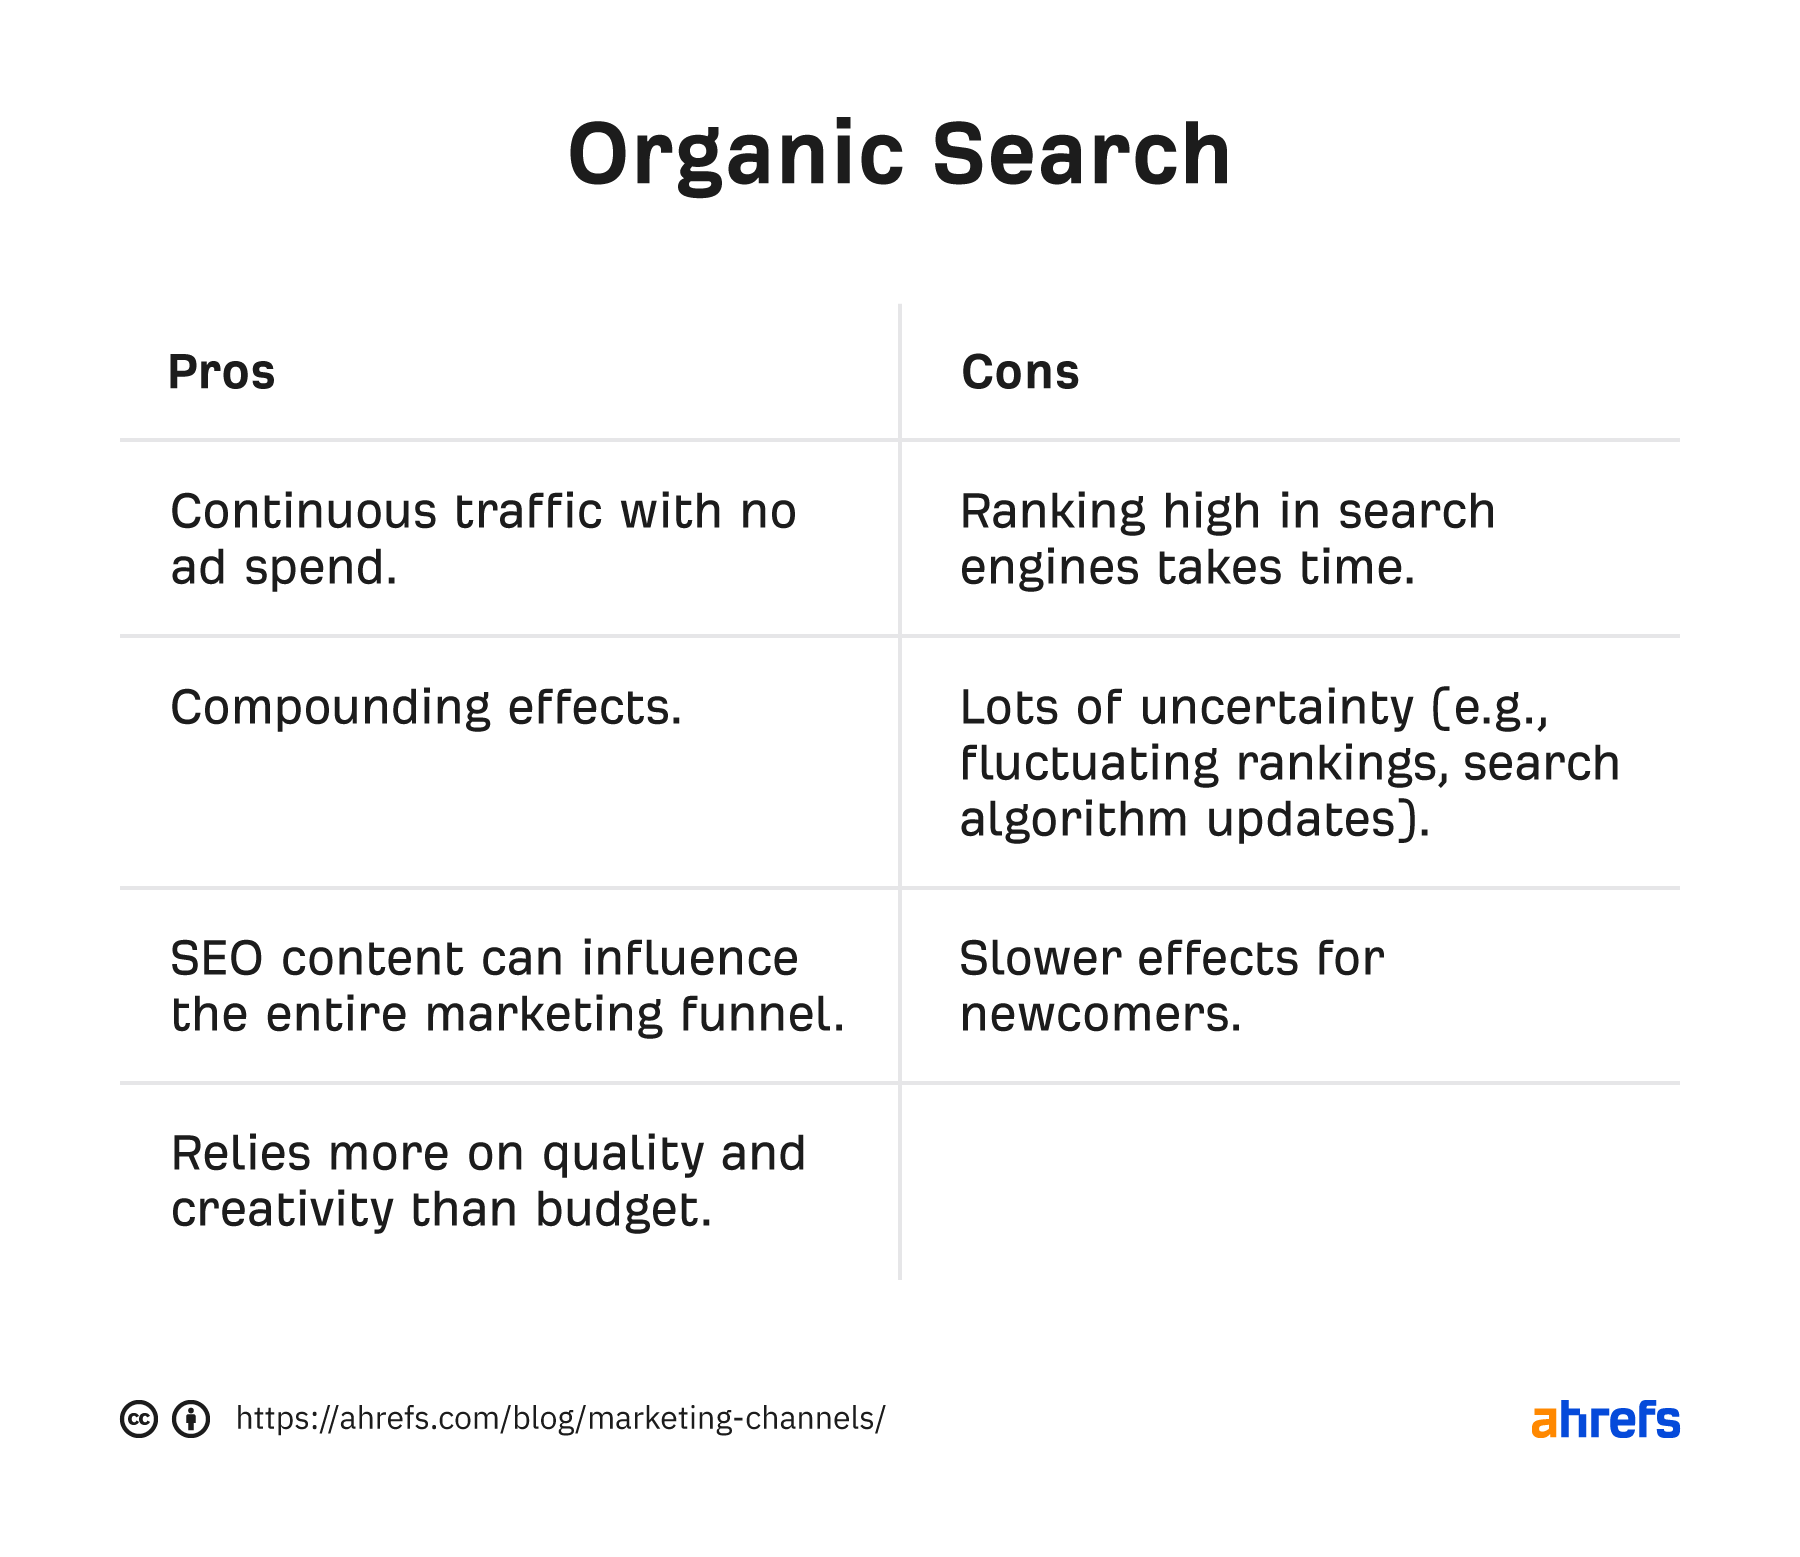 Pros and cons of organic search